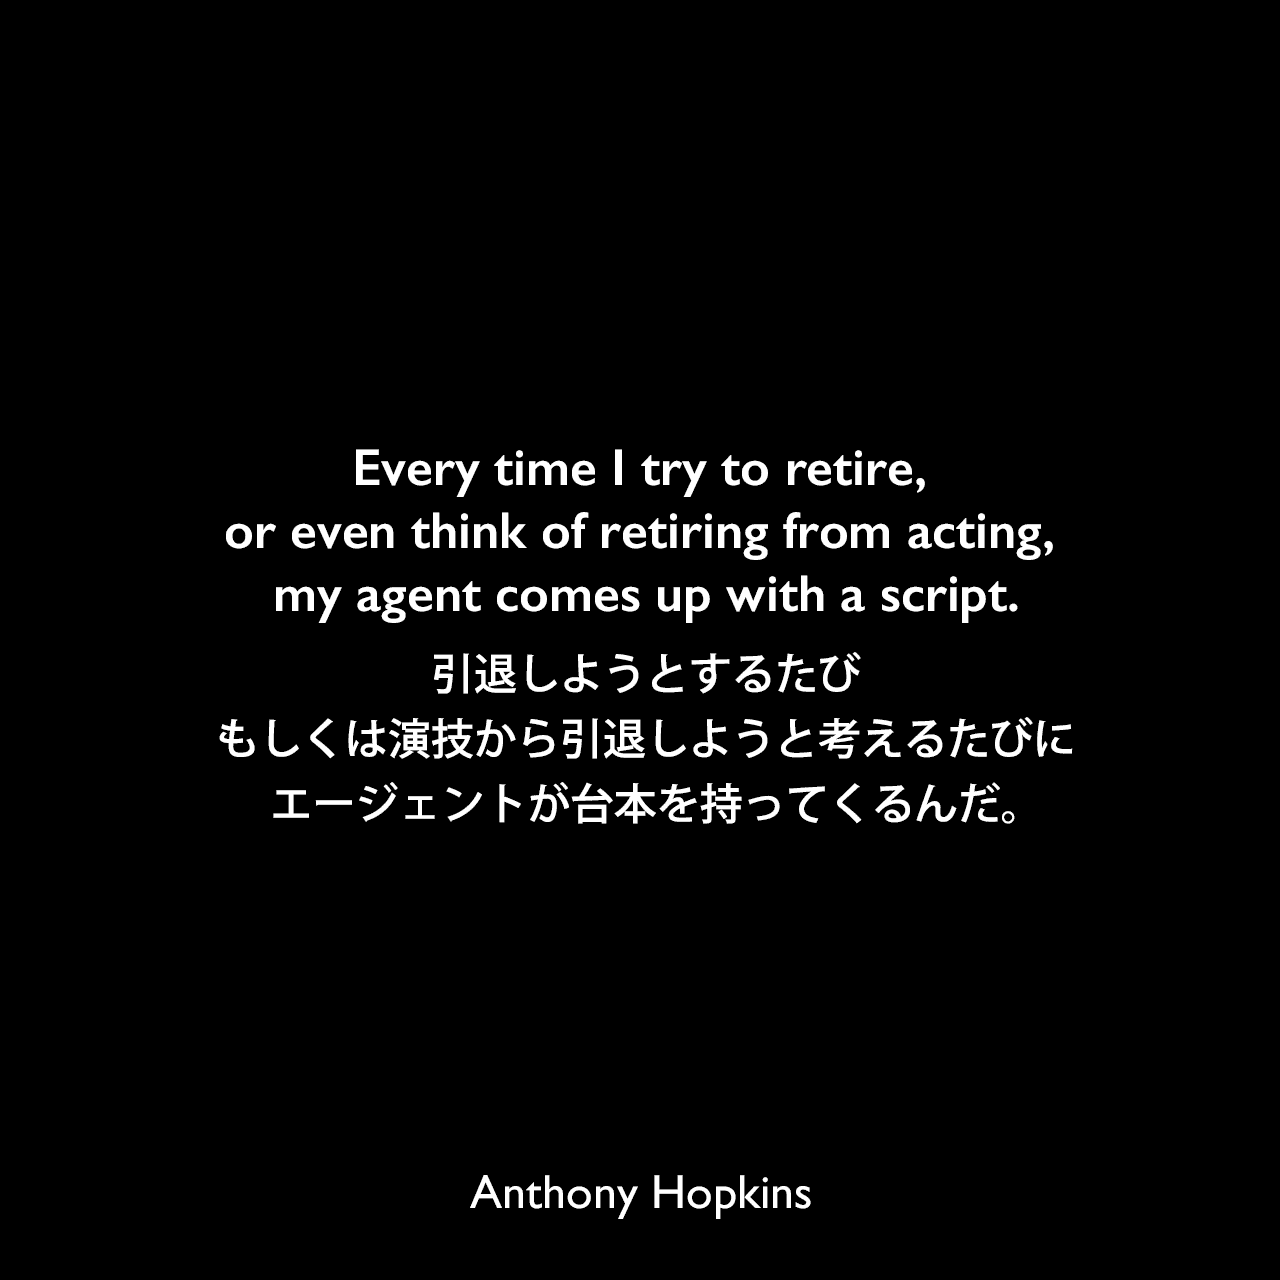 Every time I try to retire, or even think of retiring from acting, my agent comes up with a script.引退しようとするたび、もしくは演技から引退しようと考えるたびにエージェントが台本を持ってくるんだ。Anthony Hopkins